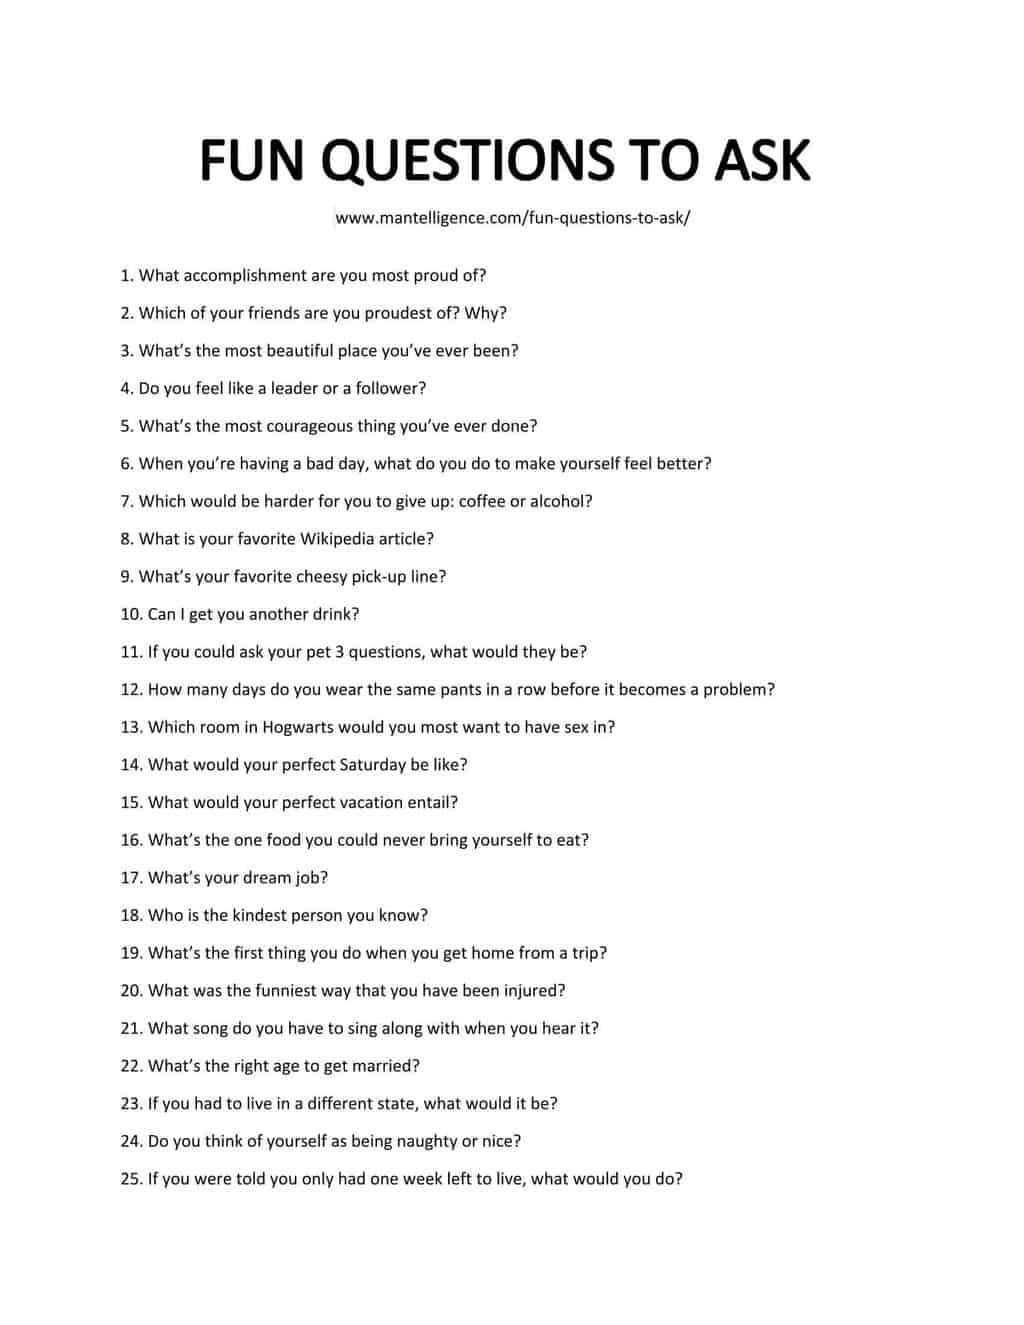 65 Really Good Questions to Ask (Fun, Interesting, Unique)